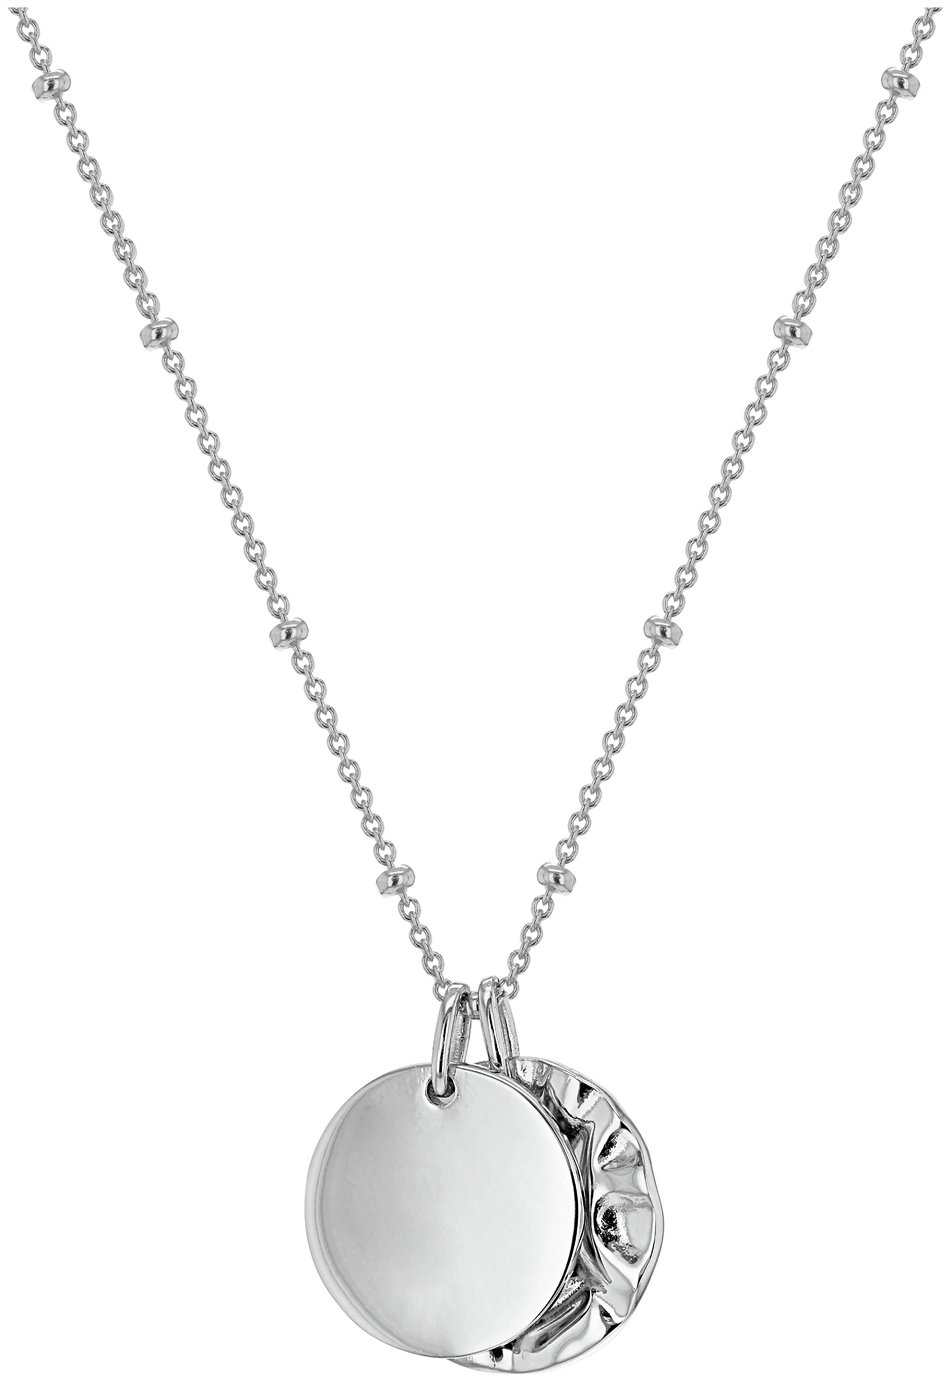 Revere Sterling Silver Personalised Disc Pendant Necklace